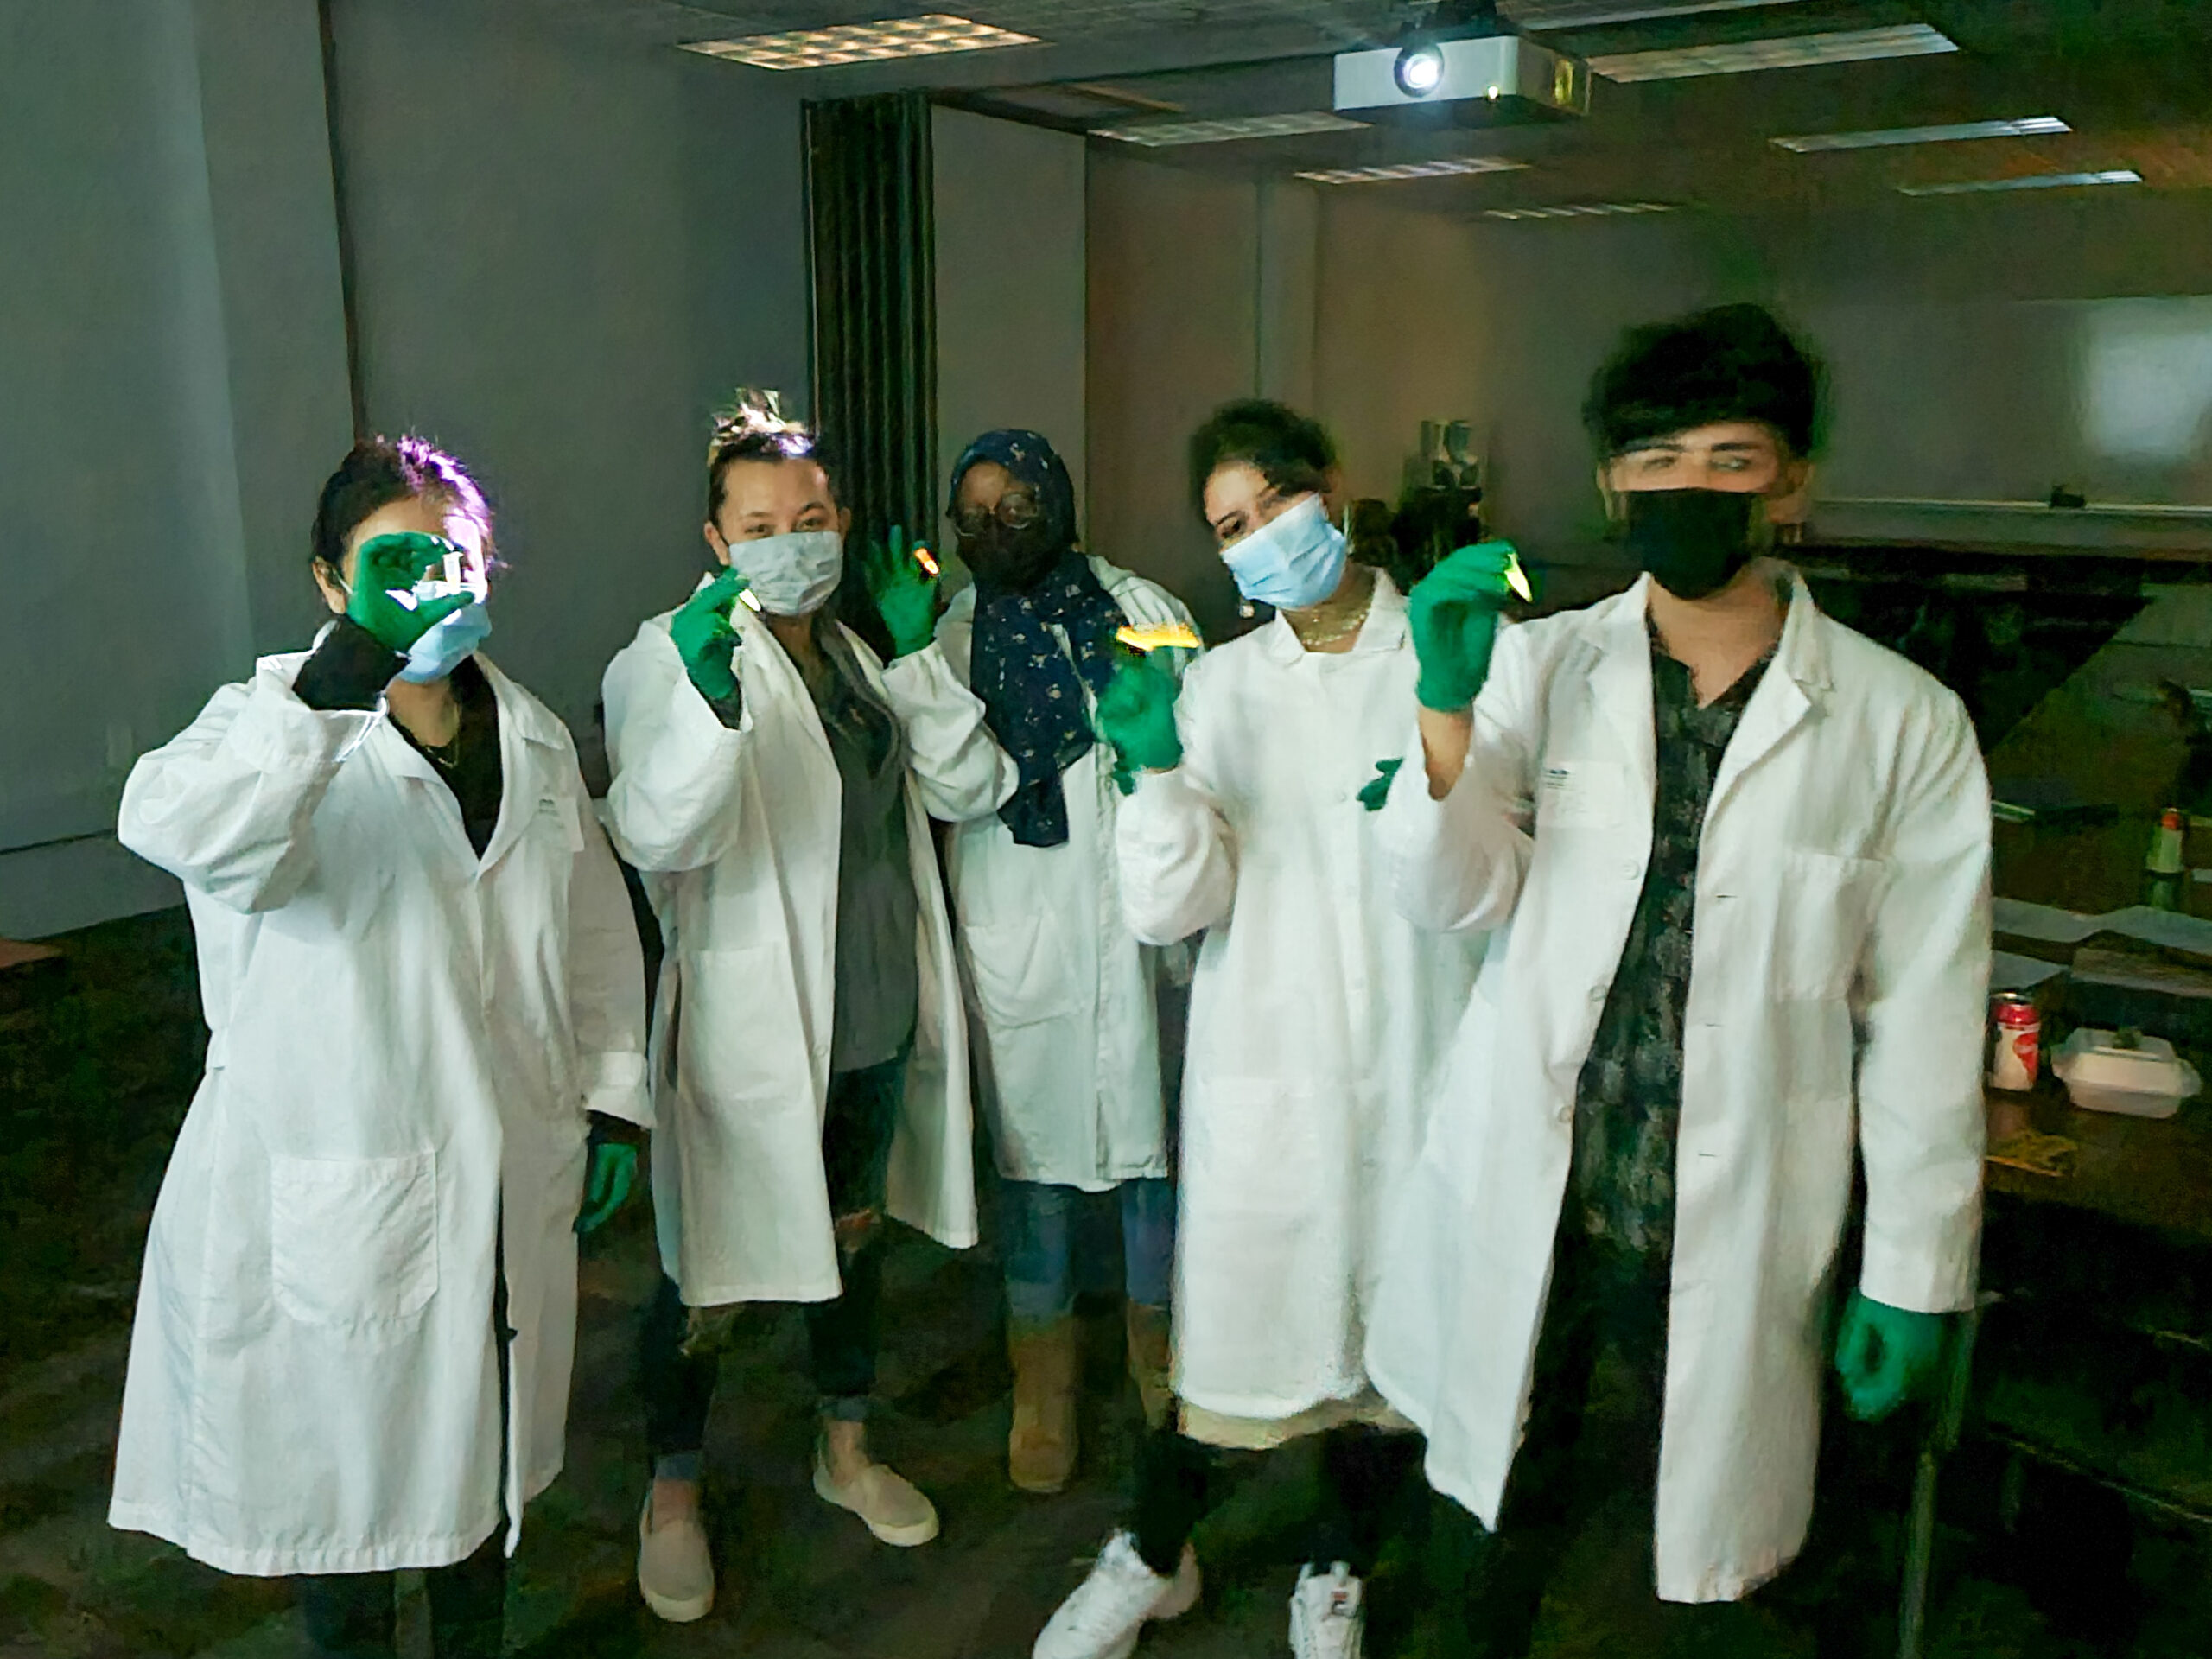 Five college students in white lab coats stand holding small white things in a dark room.